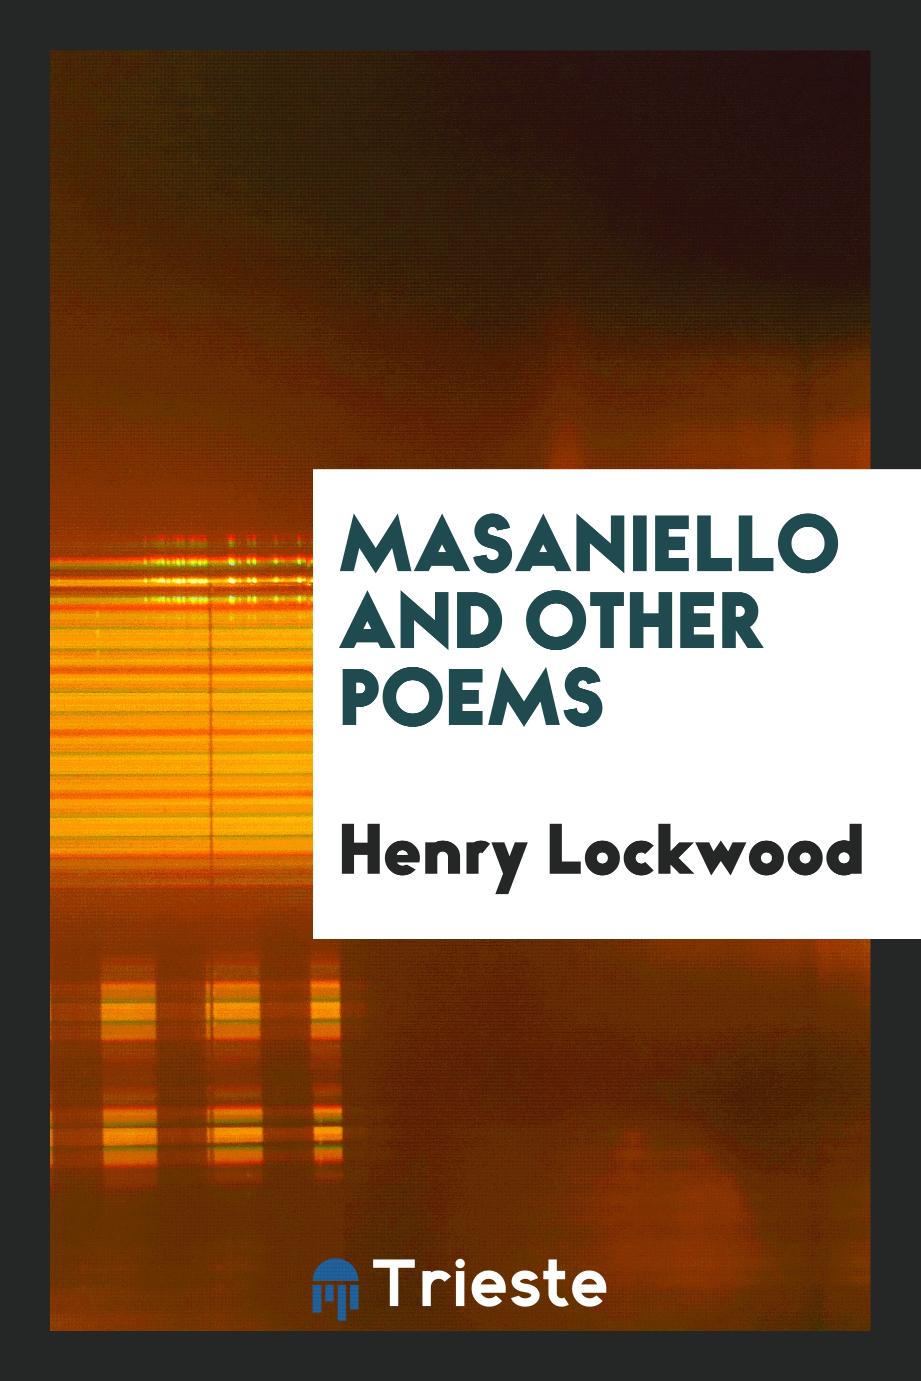 Masaniello and other poems